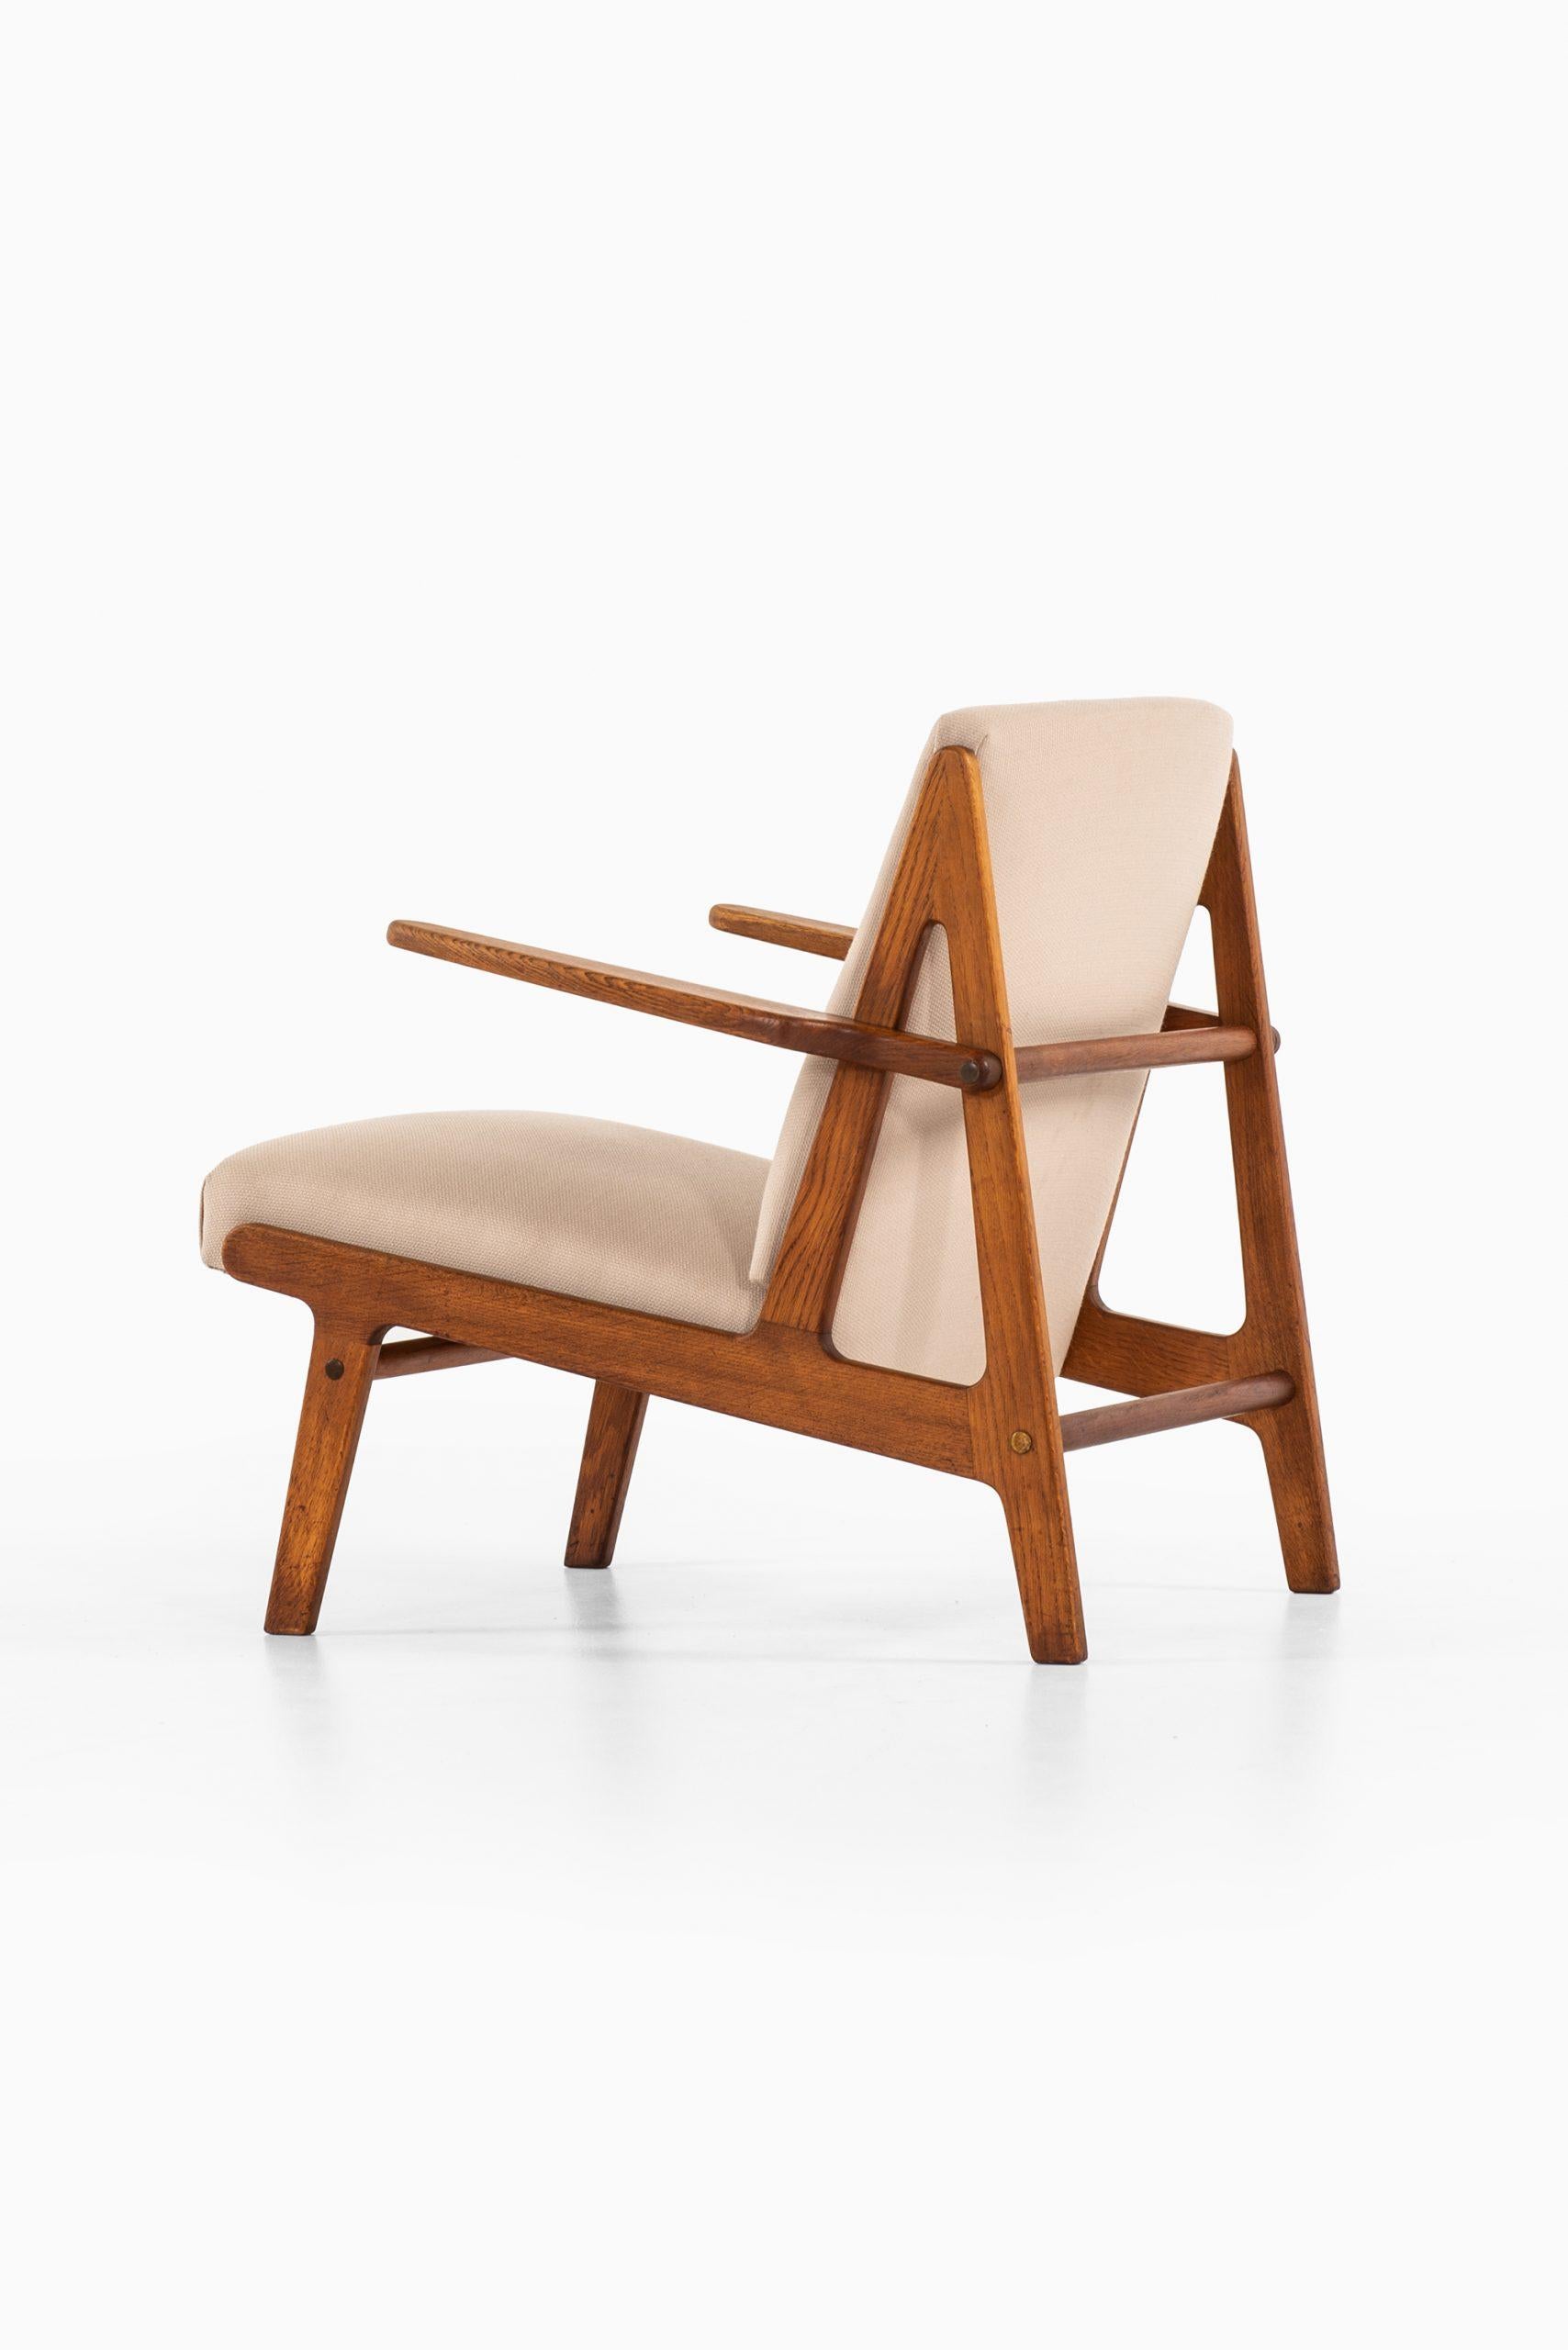 Mid-20th Century Børge Mogensen Easy Chair Produced by Tage Kristensen & Co in Denmark For Sale